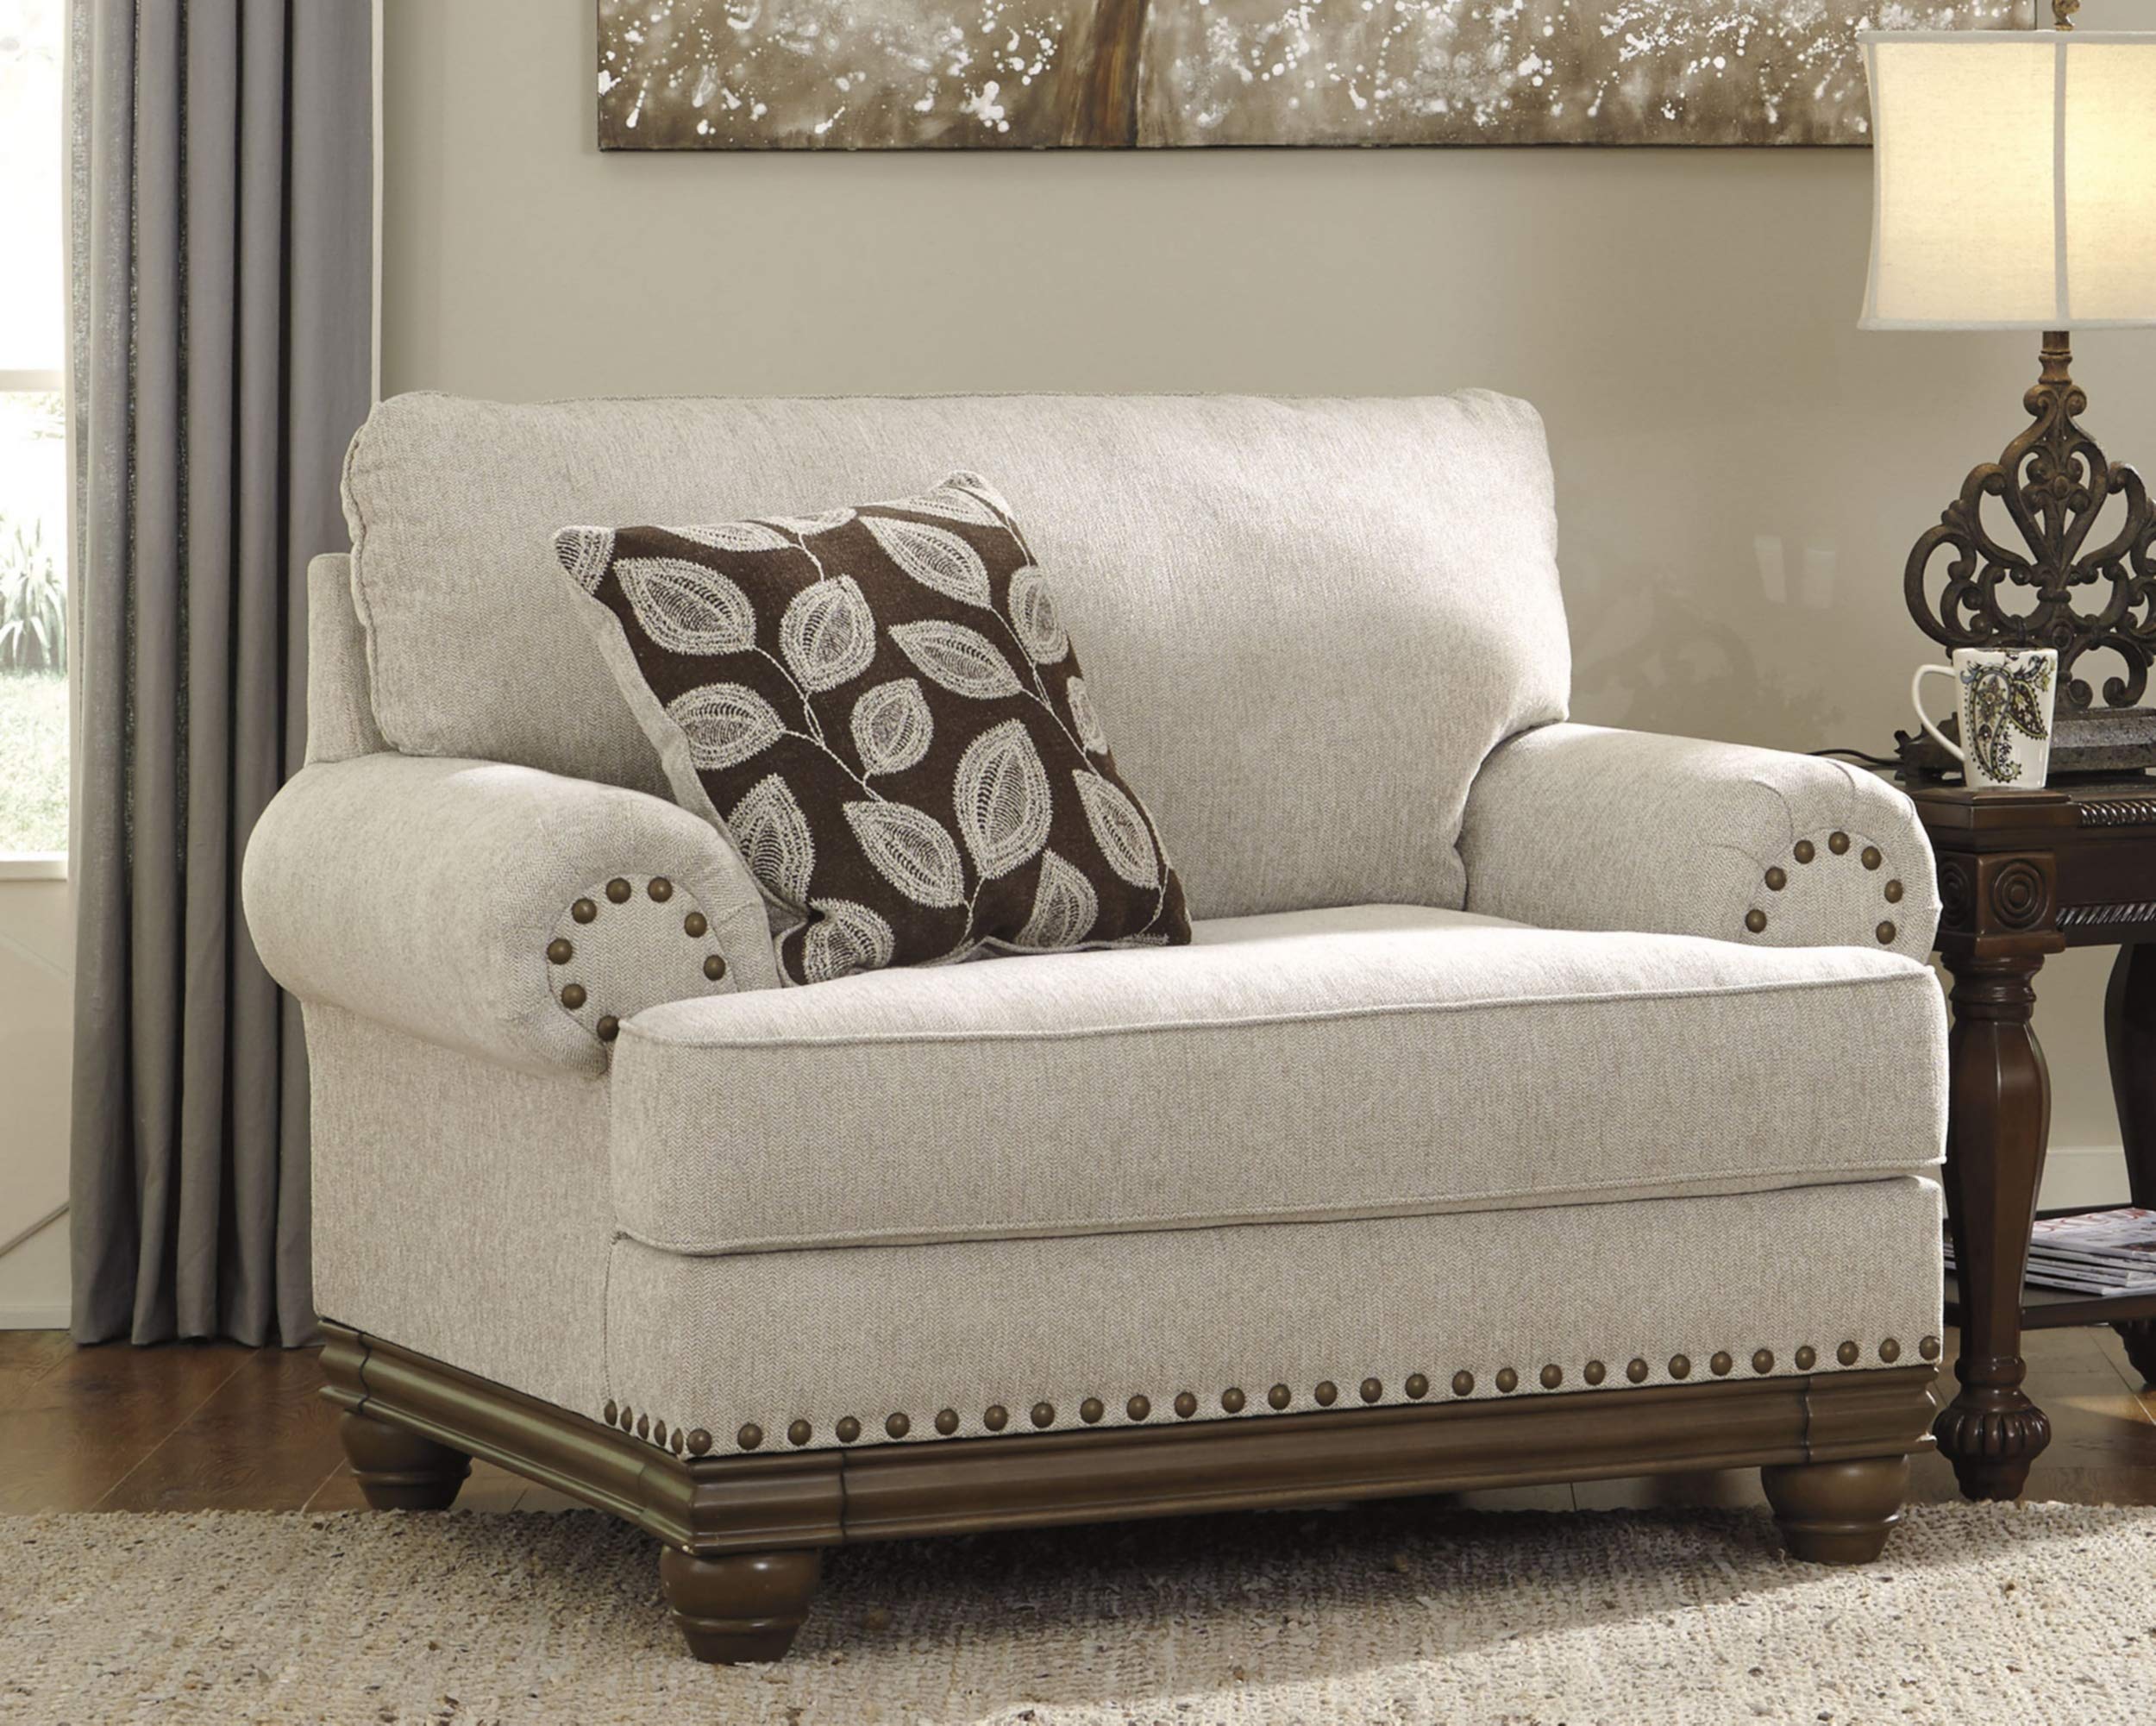 Signature Design by Ashley Harleson Modern Farmhouse Chair and a Half with Nailhead Trim and Accent Pillow, Beige